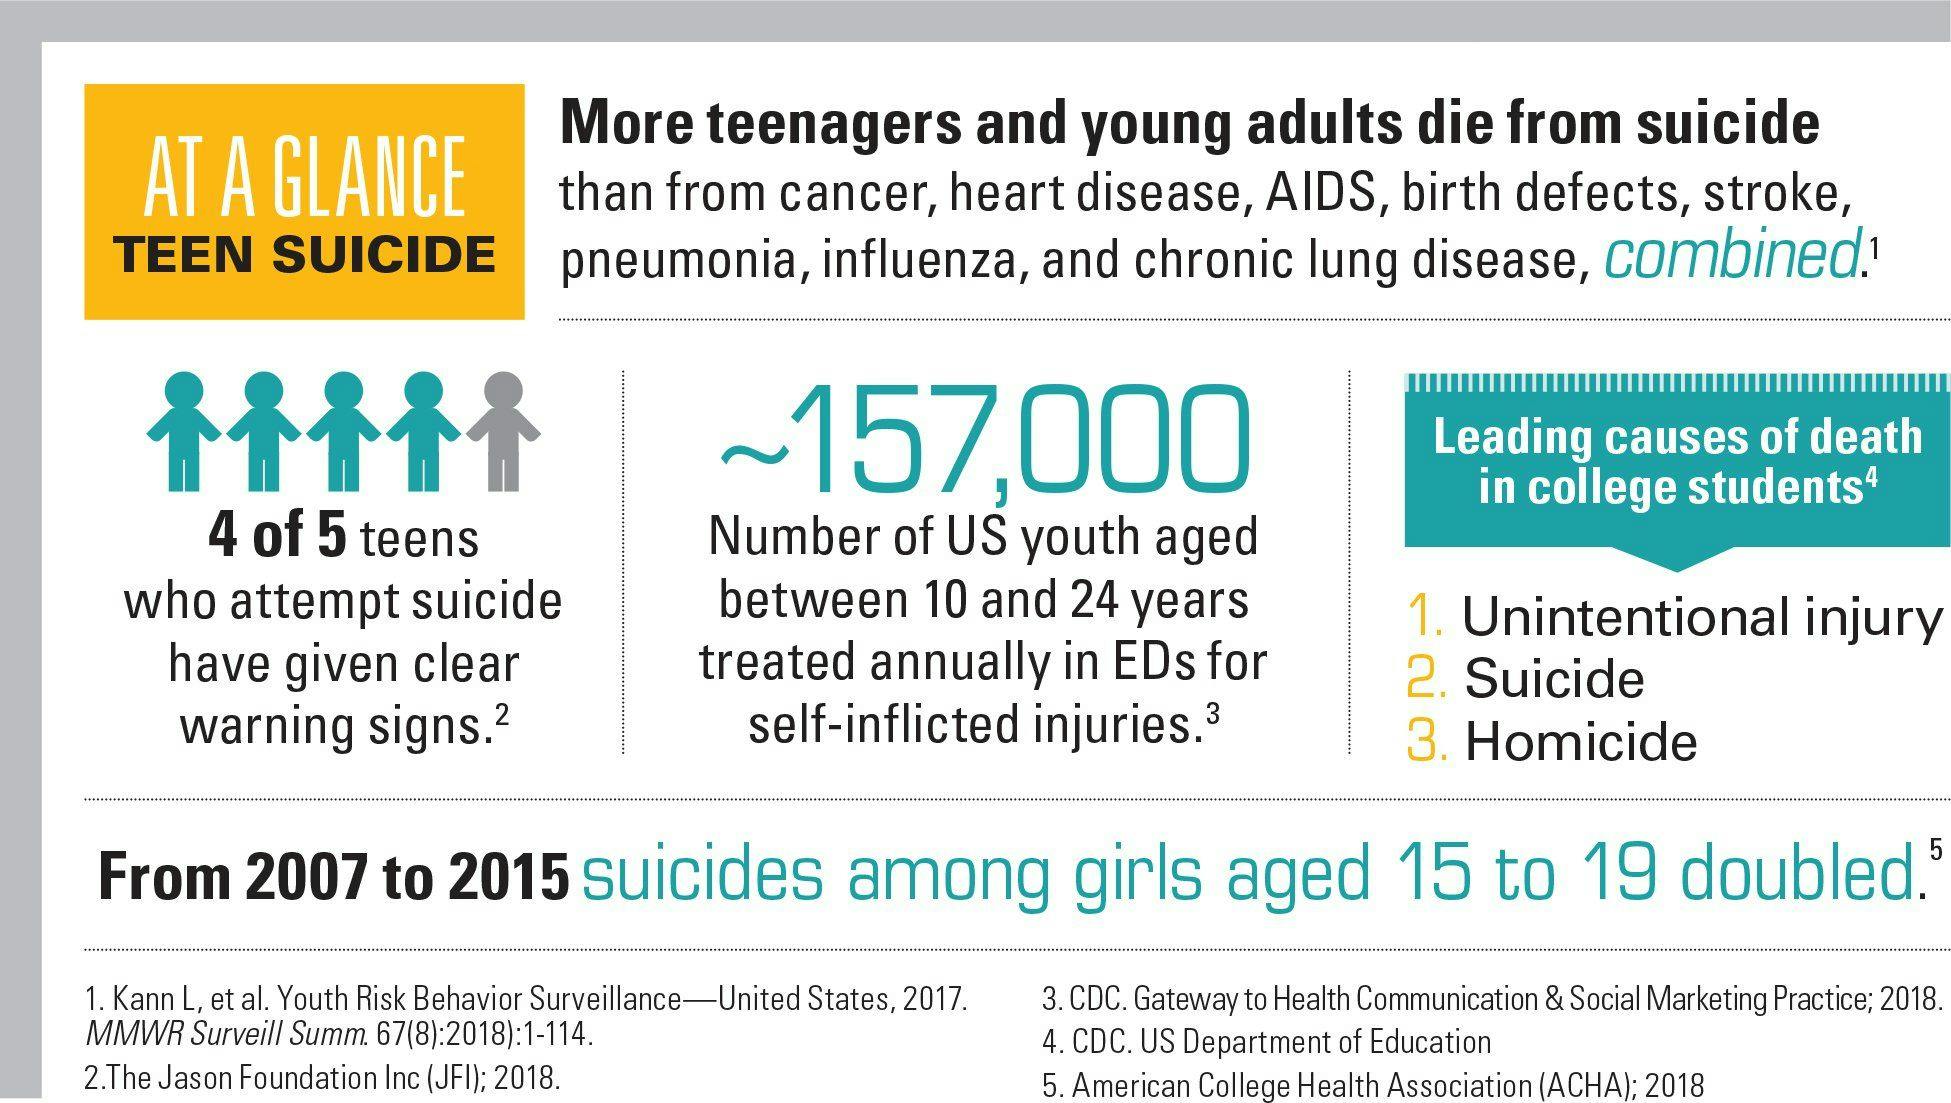 At a Glance: Teen Suicide